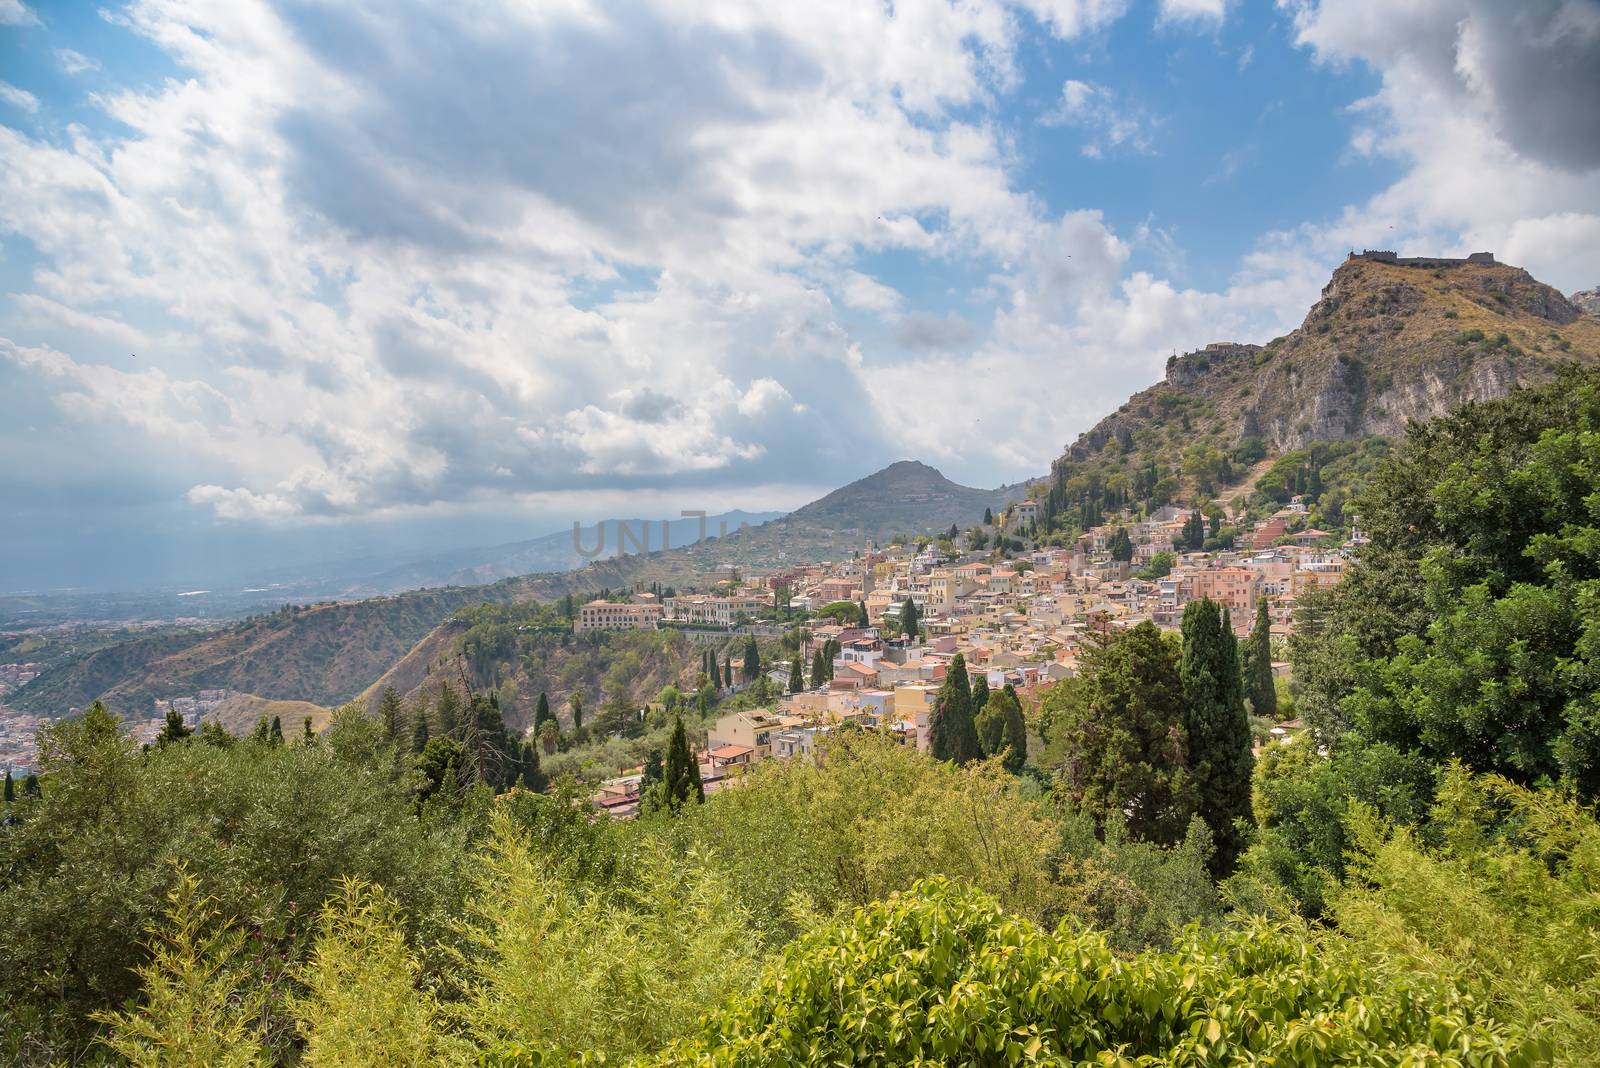 Beautiful view of picturesque town of Taormina, Sicily, Italy